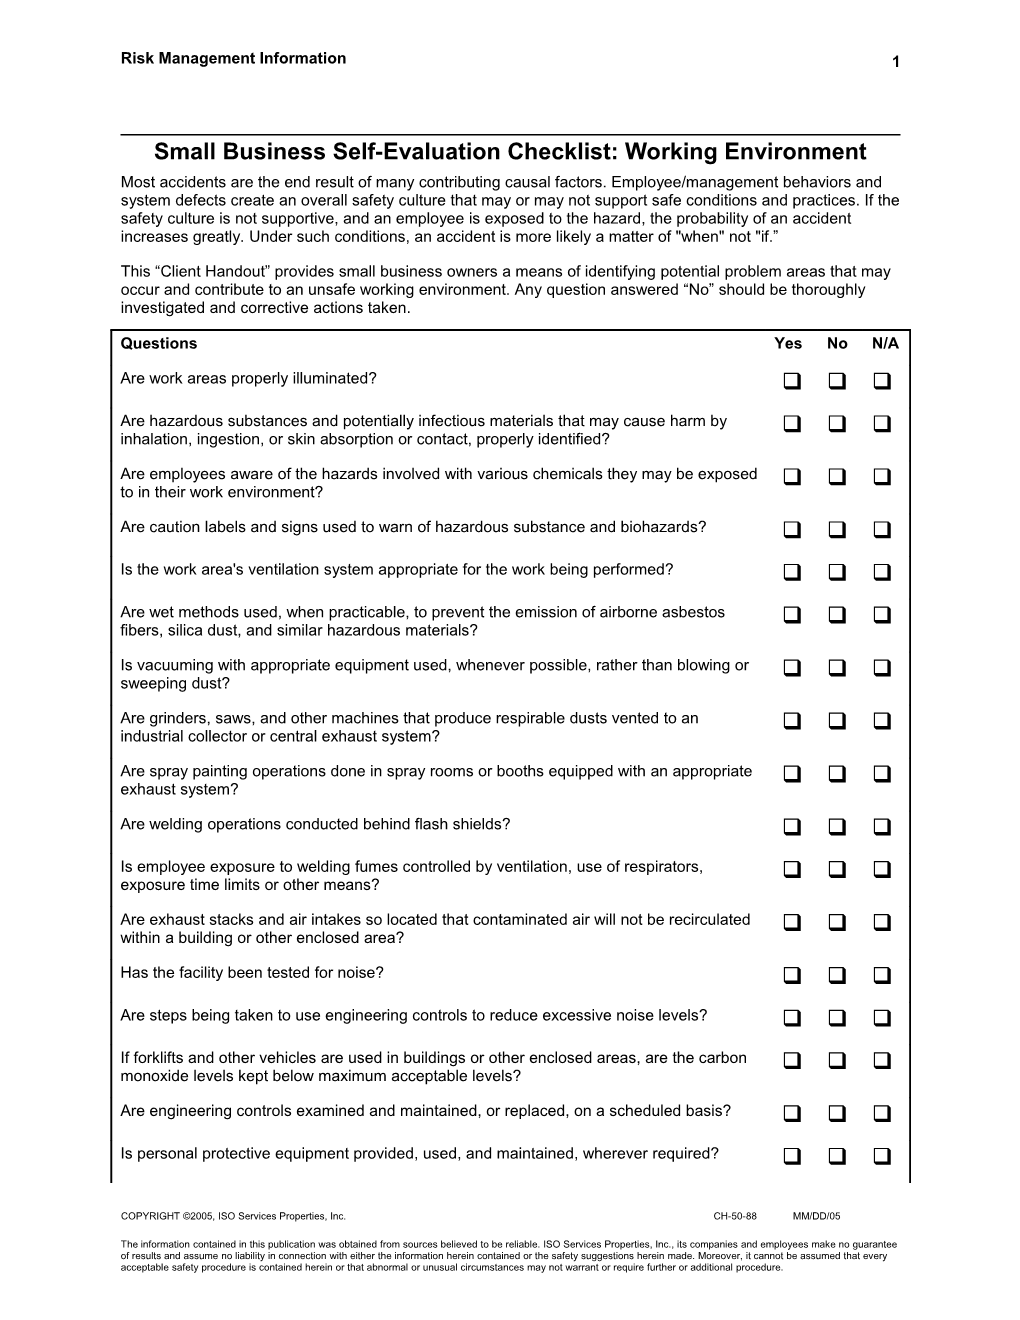 Small Business Self-Evaluation Checklist: Working Environment